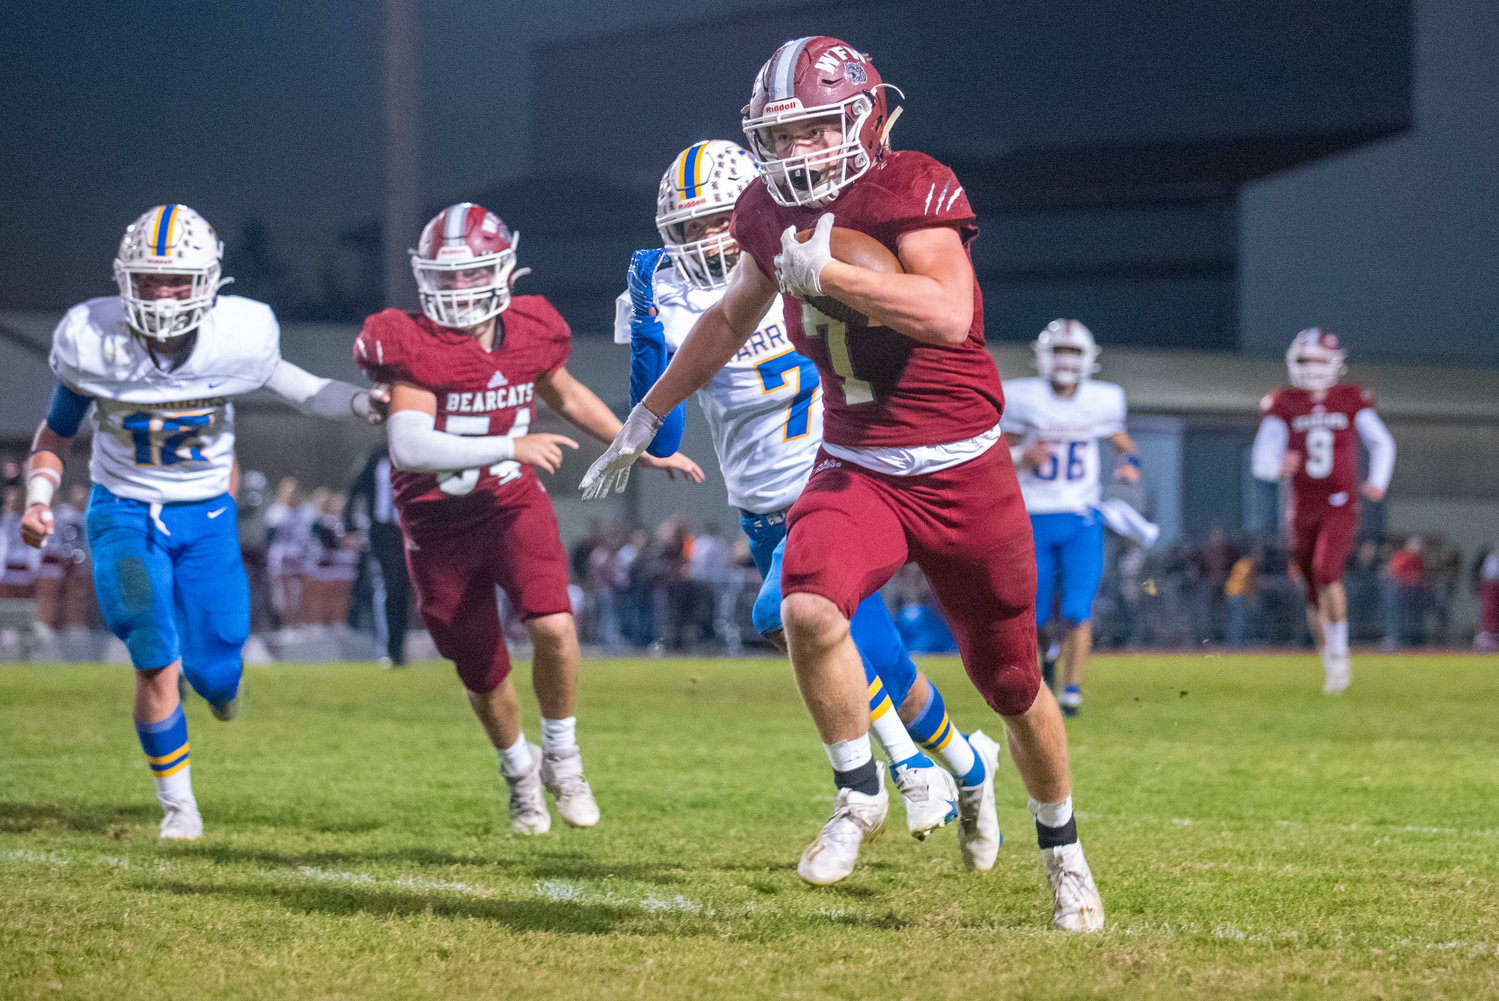 W.F. West's Brock Guyette (7) rips off a long run against Rochester on Oct. 8, 2021.